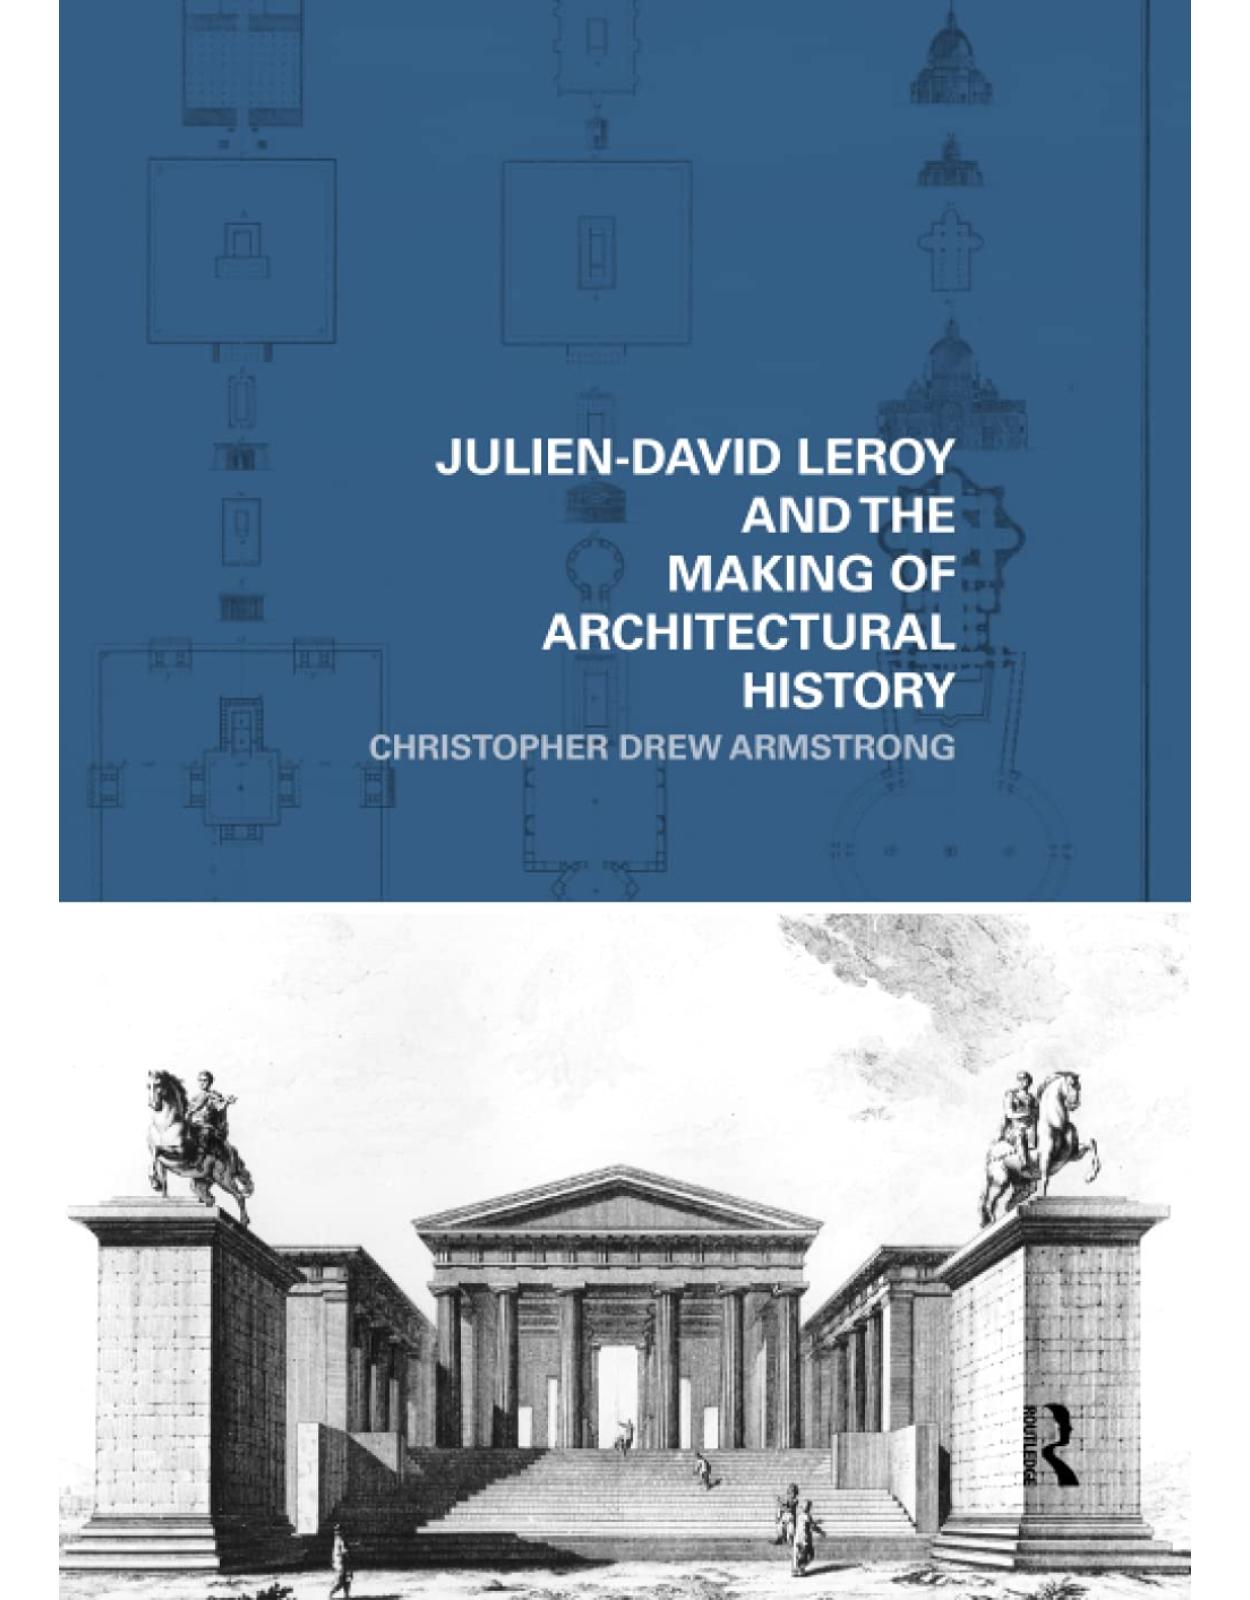 Julien-David Leroy and the Making of Architectural History (The Classical Tradition in Architecture) 